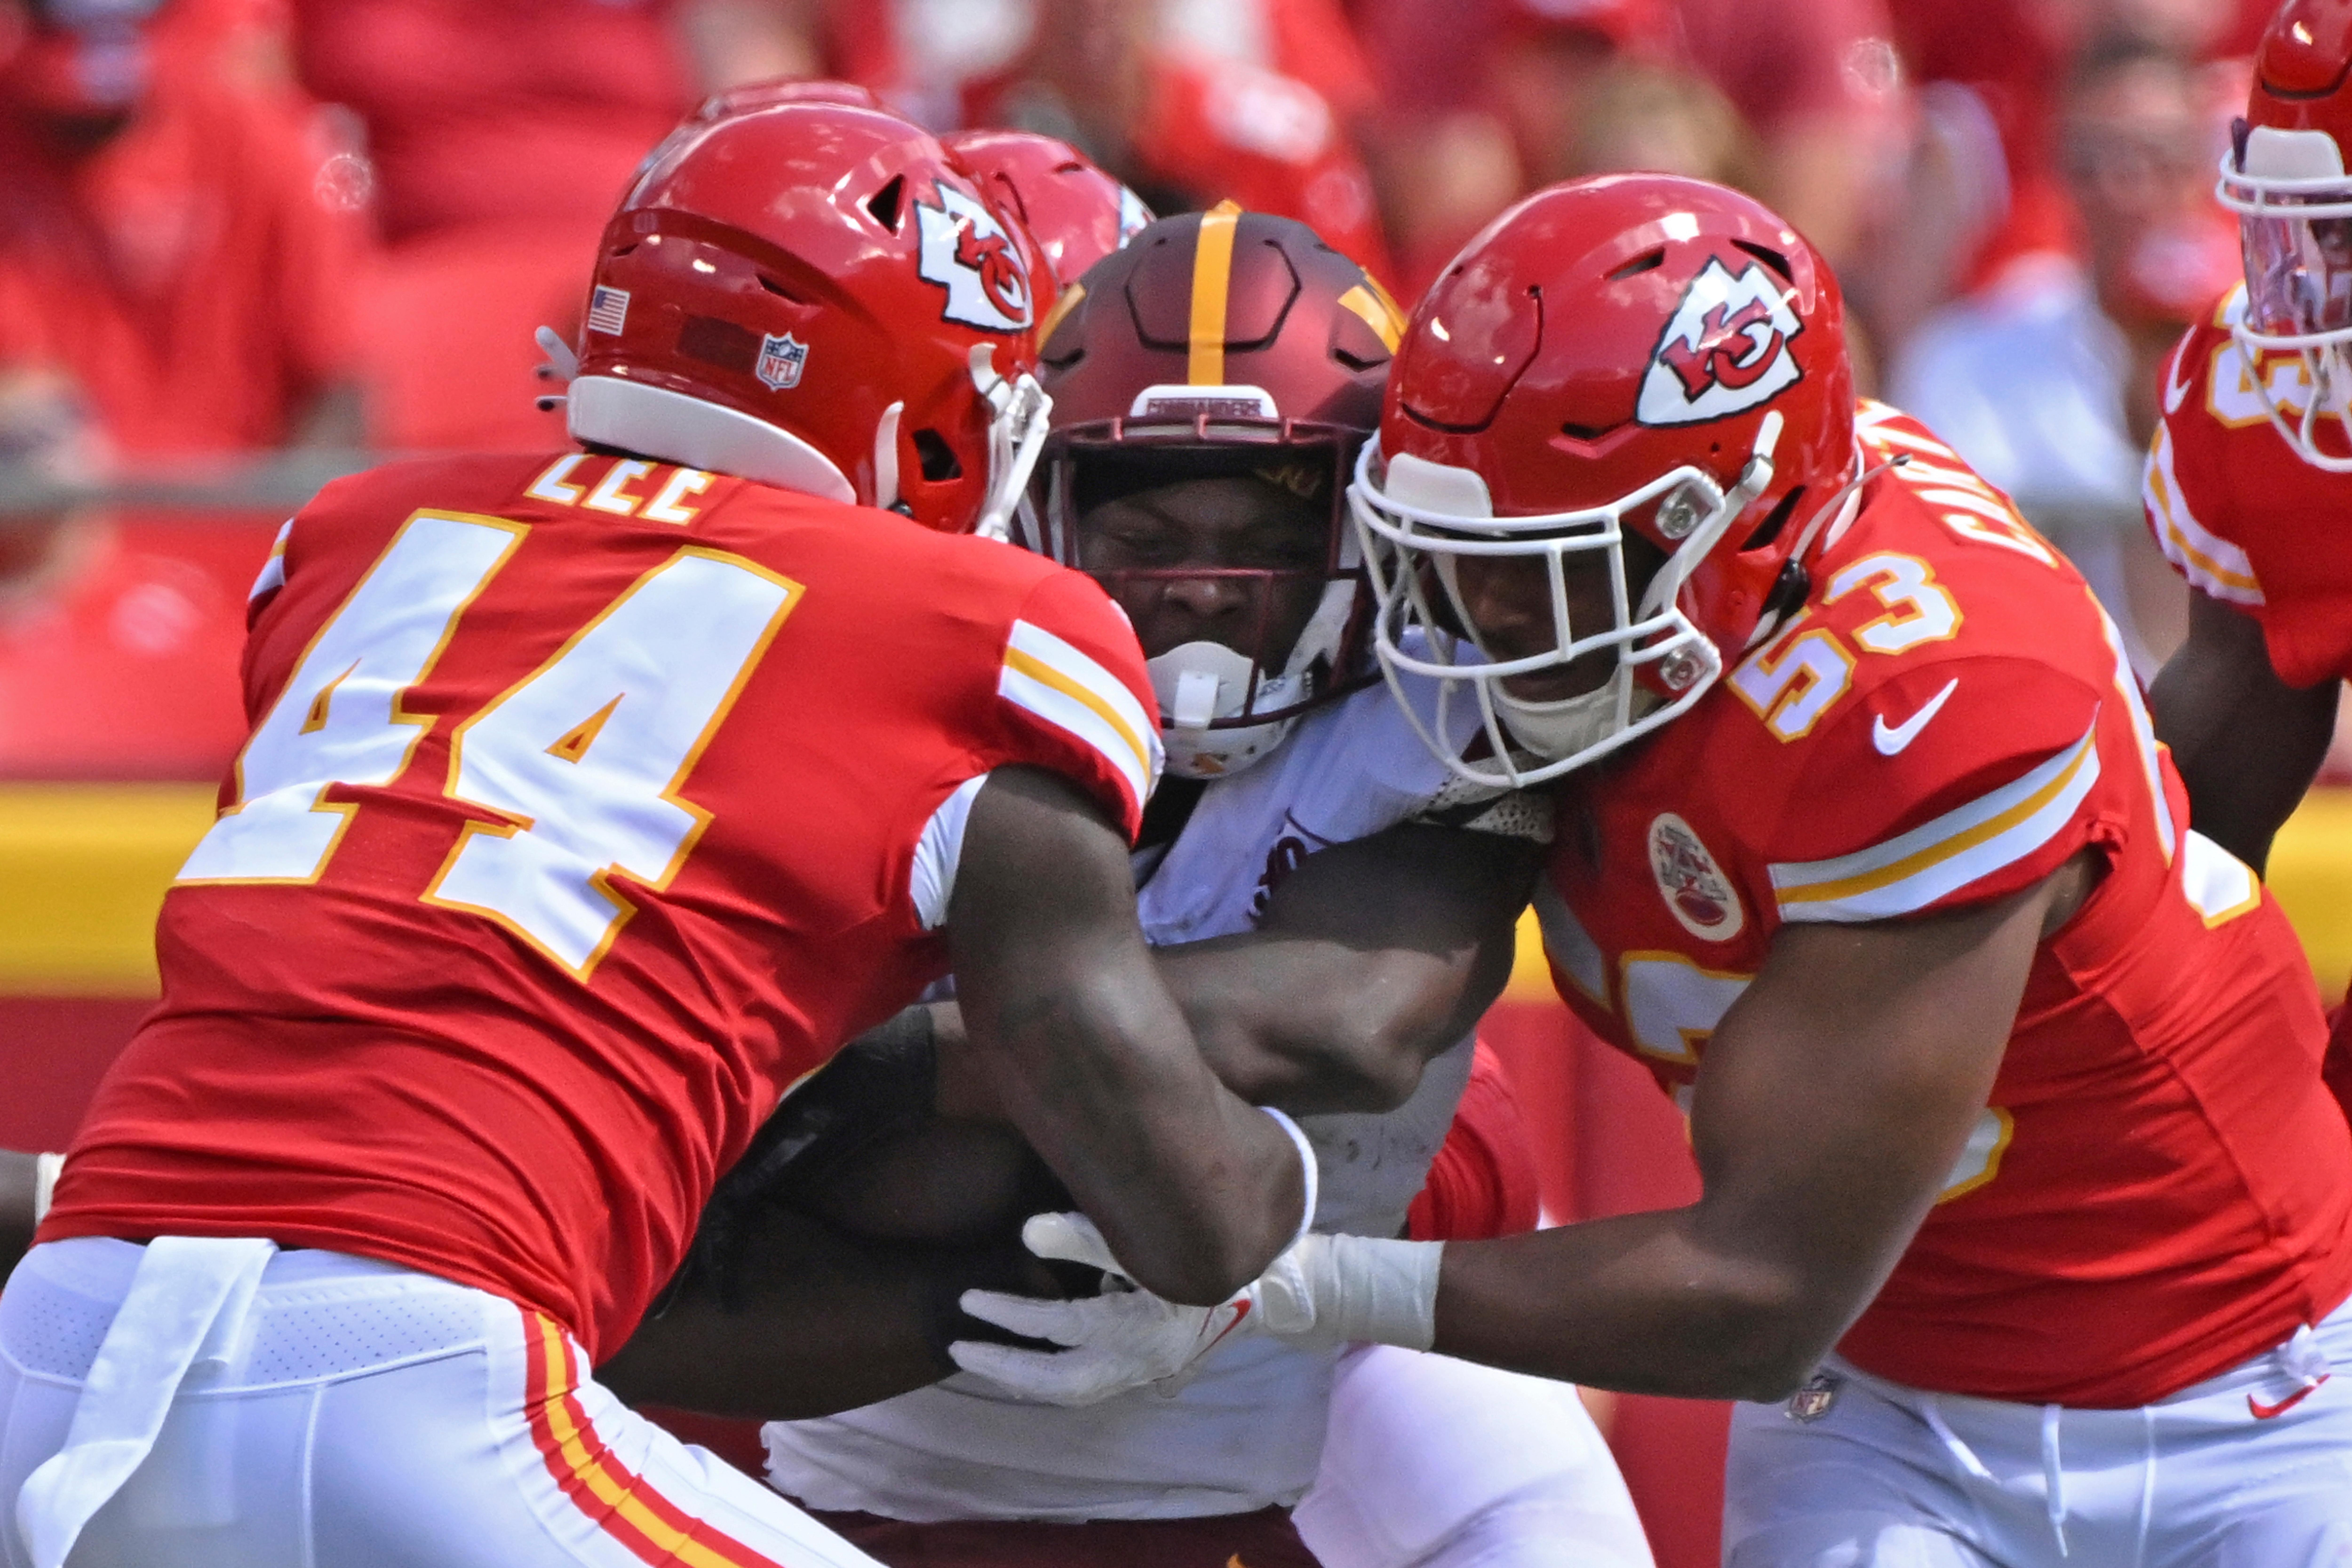 2017 Kansas City Chiefs Schedule Released - Chiefs Tickets For Less